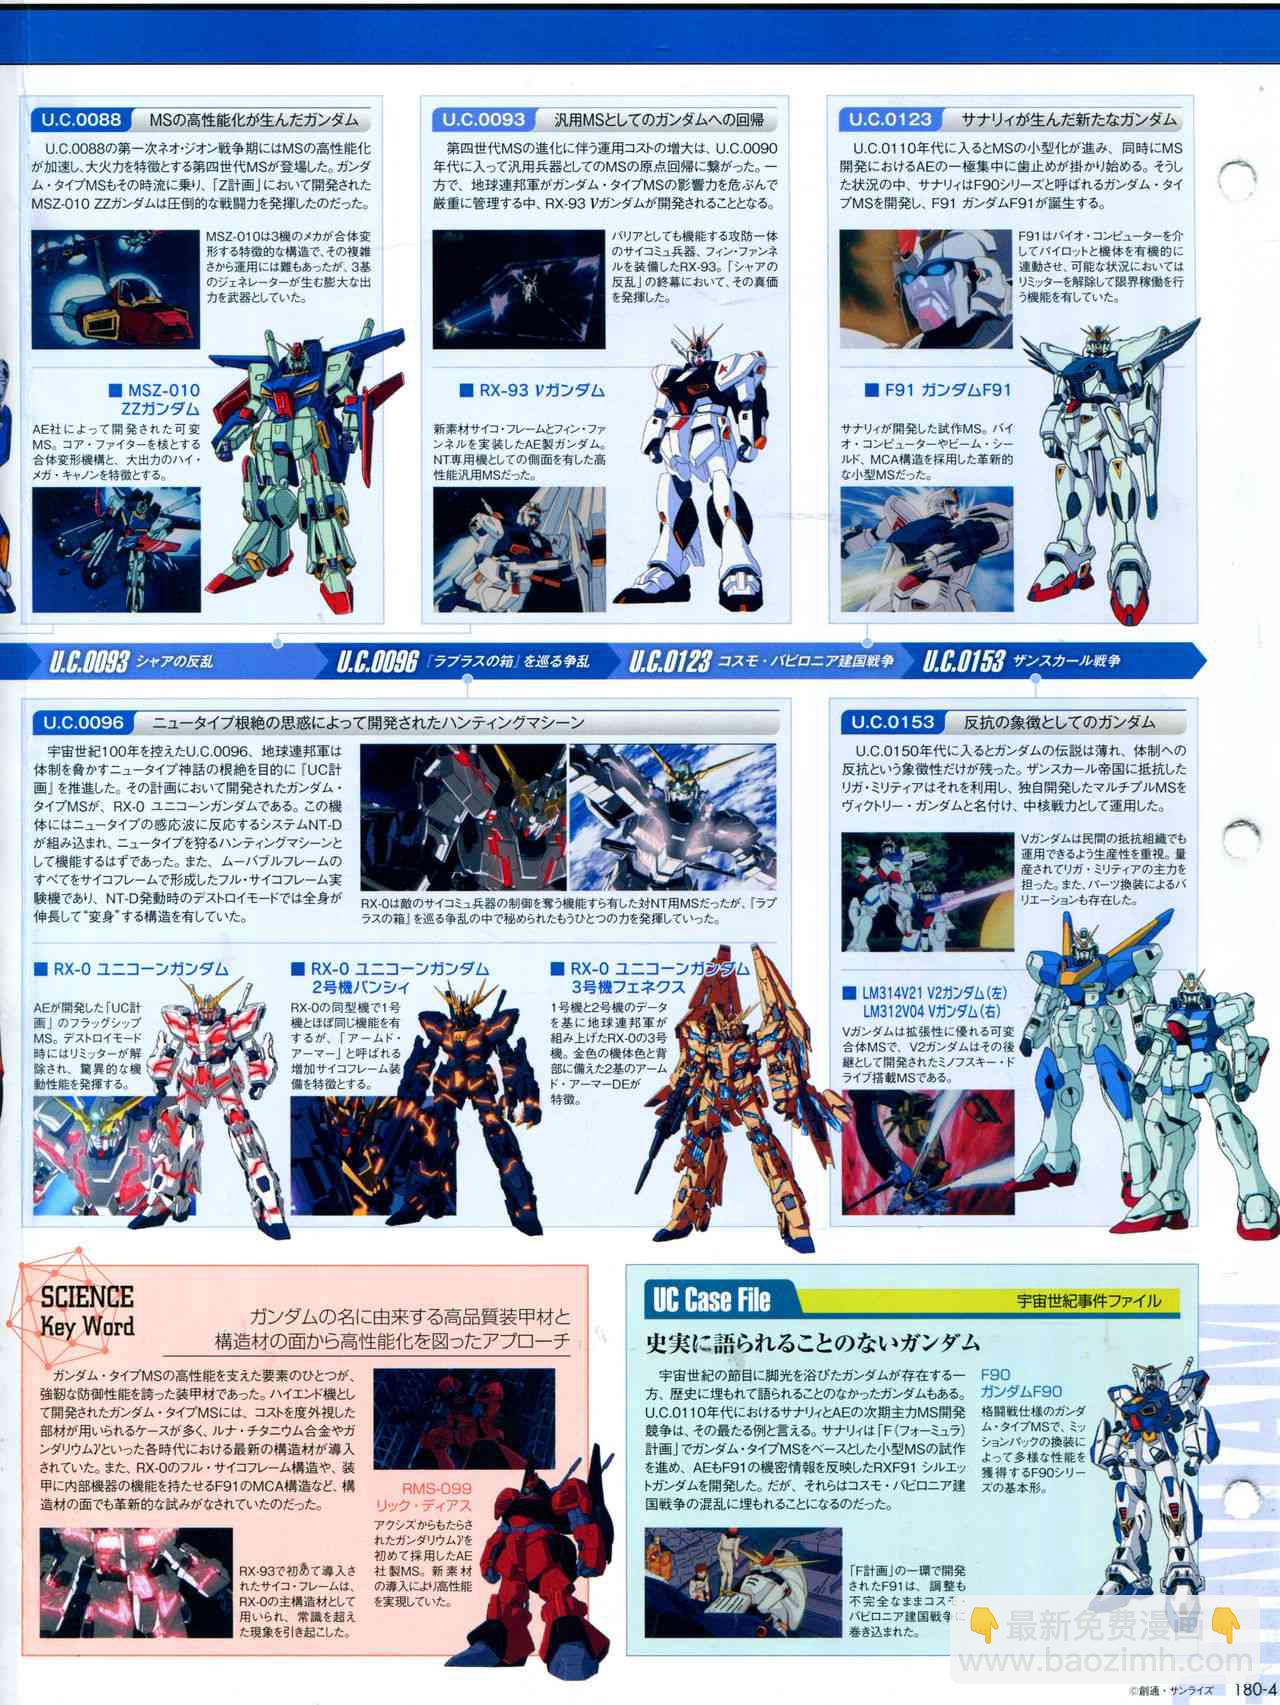 The Official Gundam Perfect File  - 180話 - 1